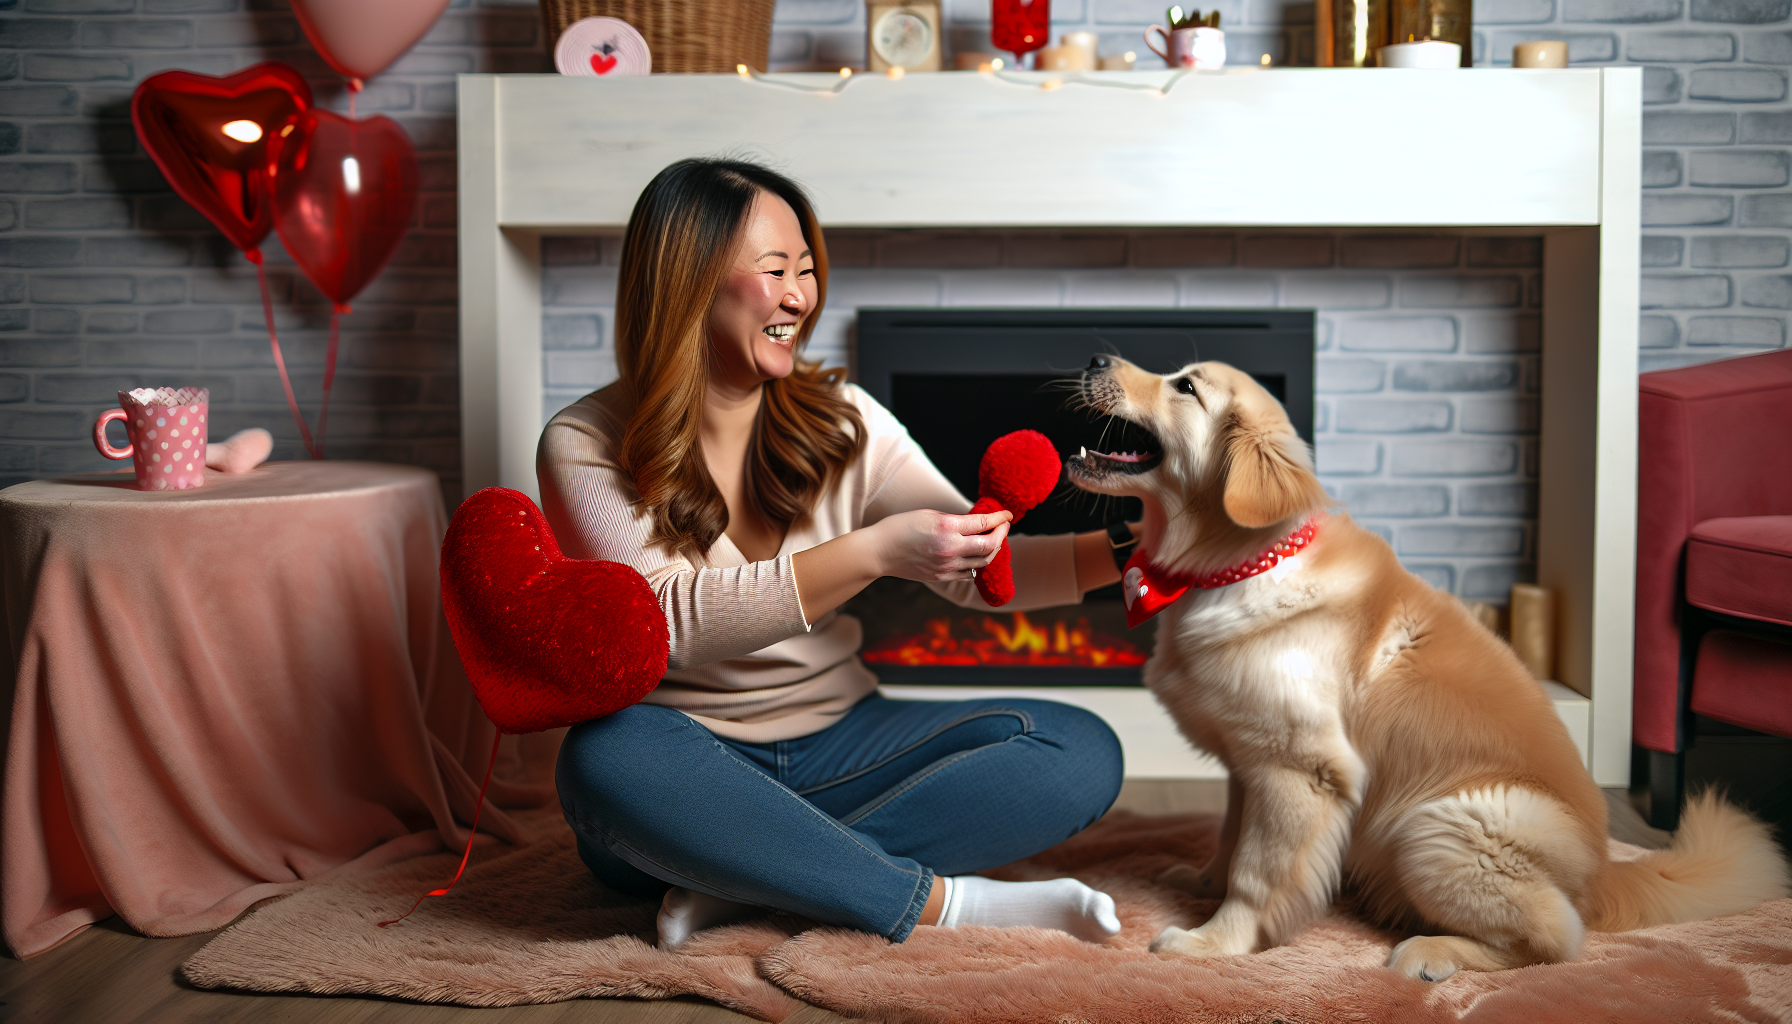 Capturing Valentine's Day memories with your pet through a themed photo shoot